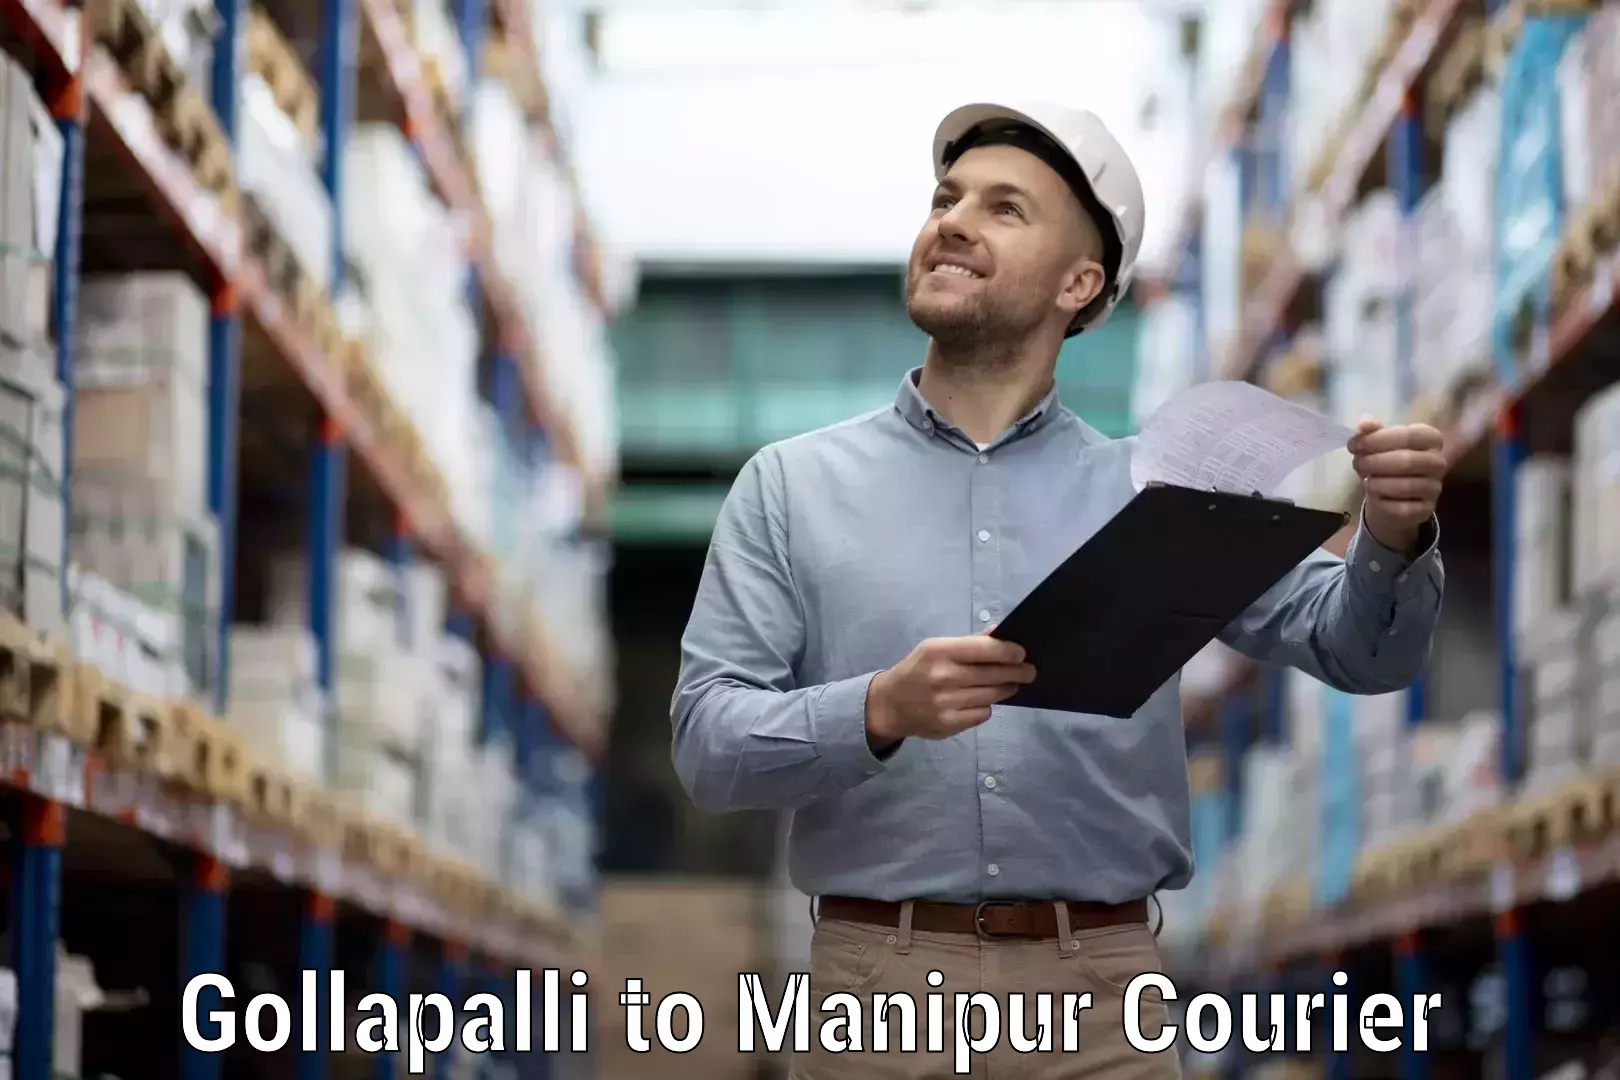 High-speed parcel service Gollapalli to Manipur